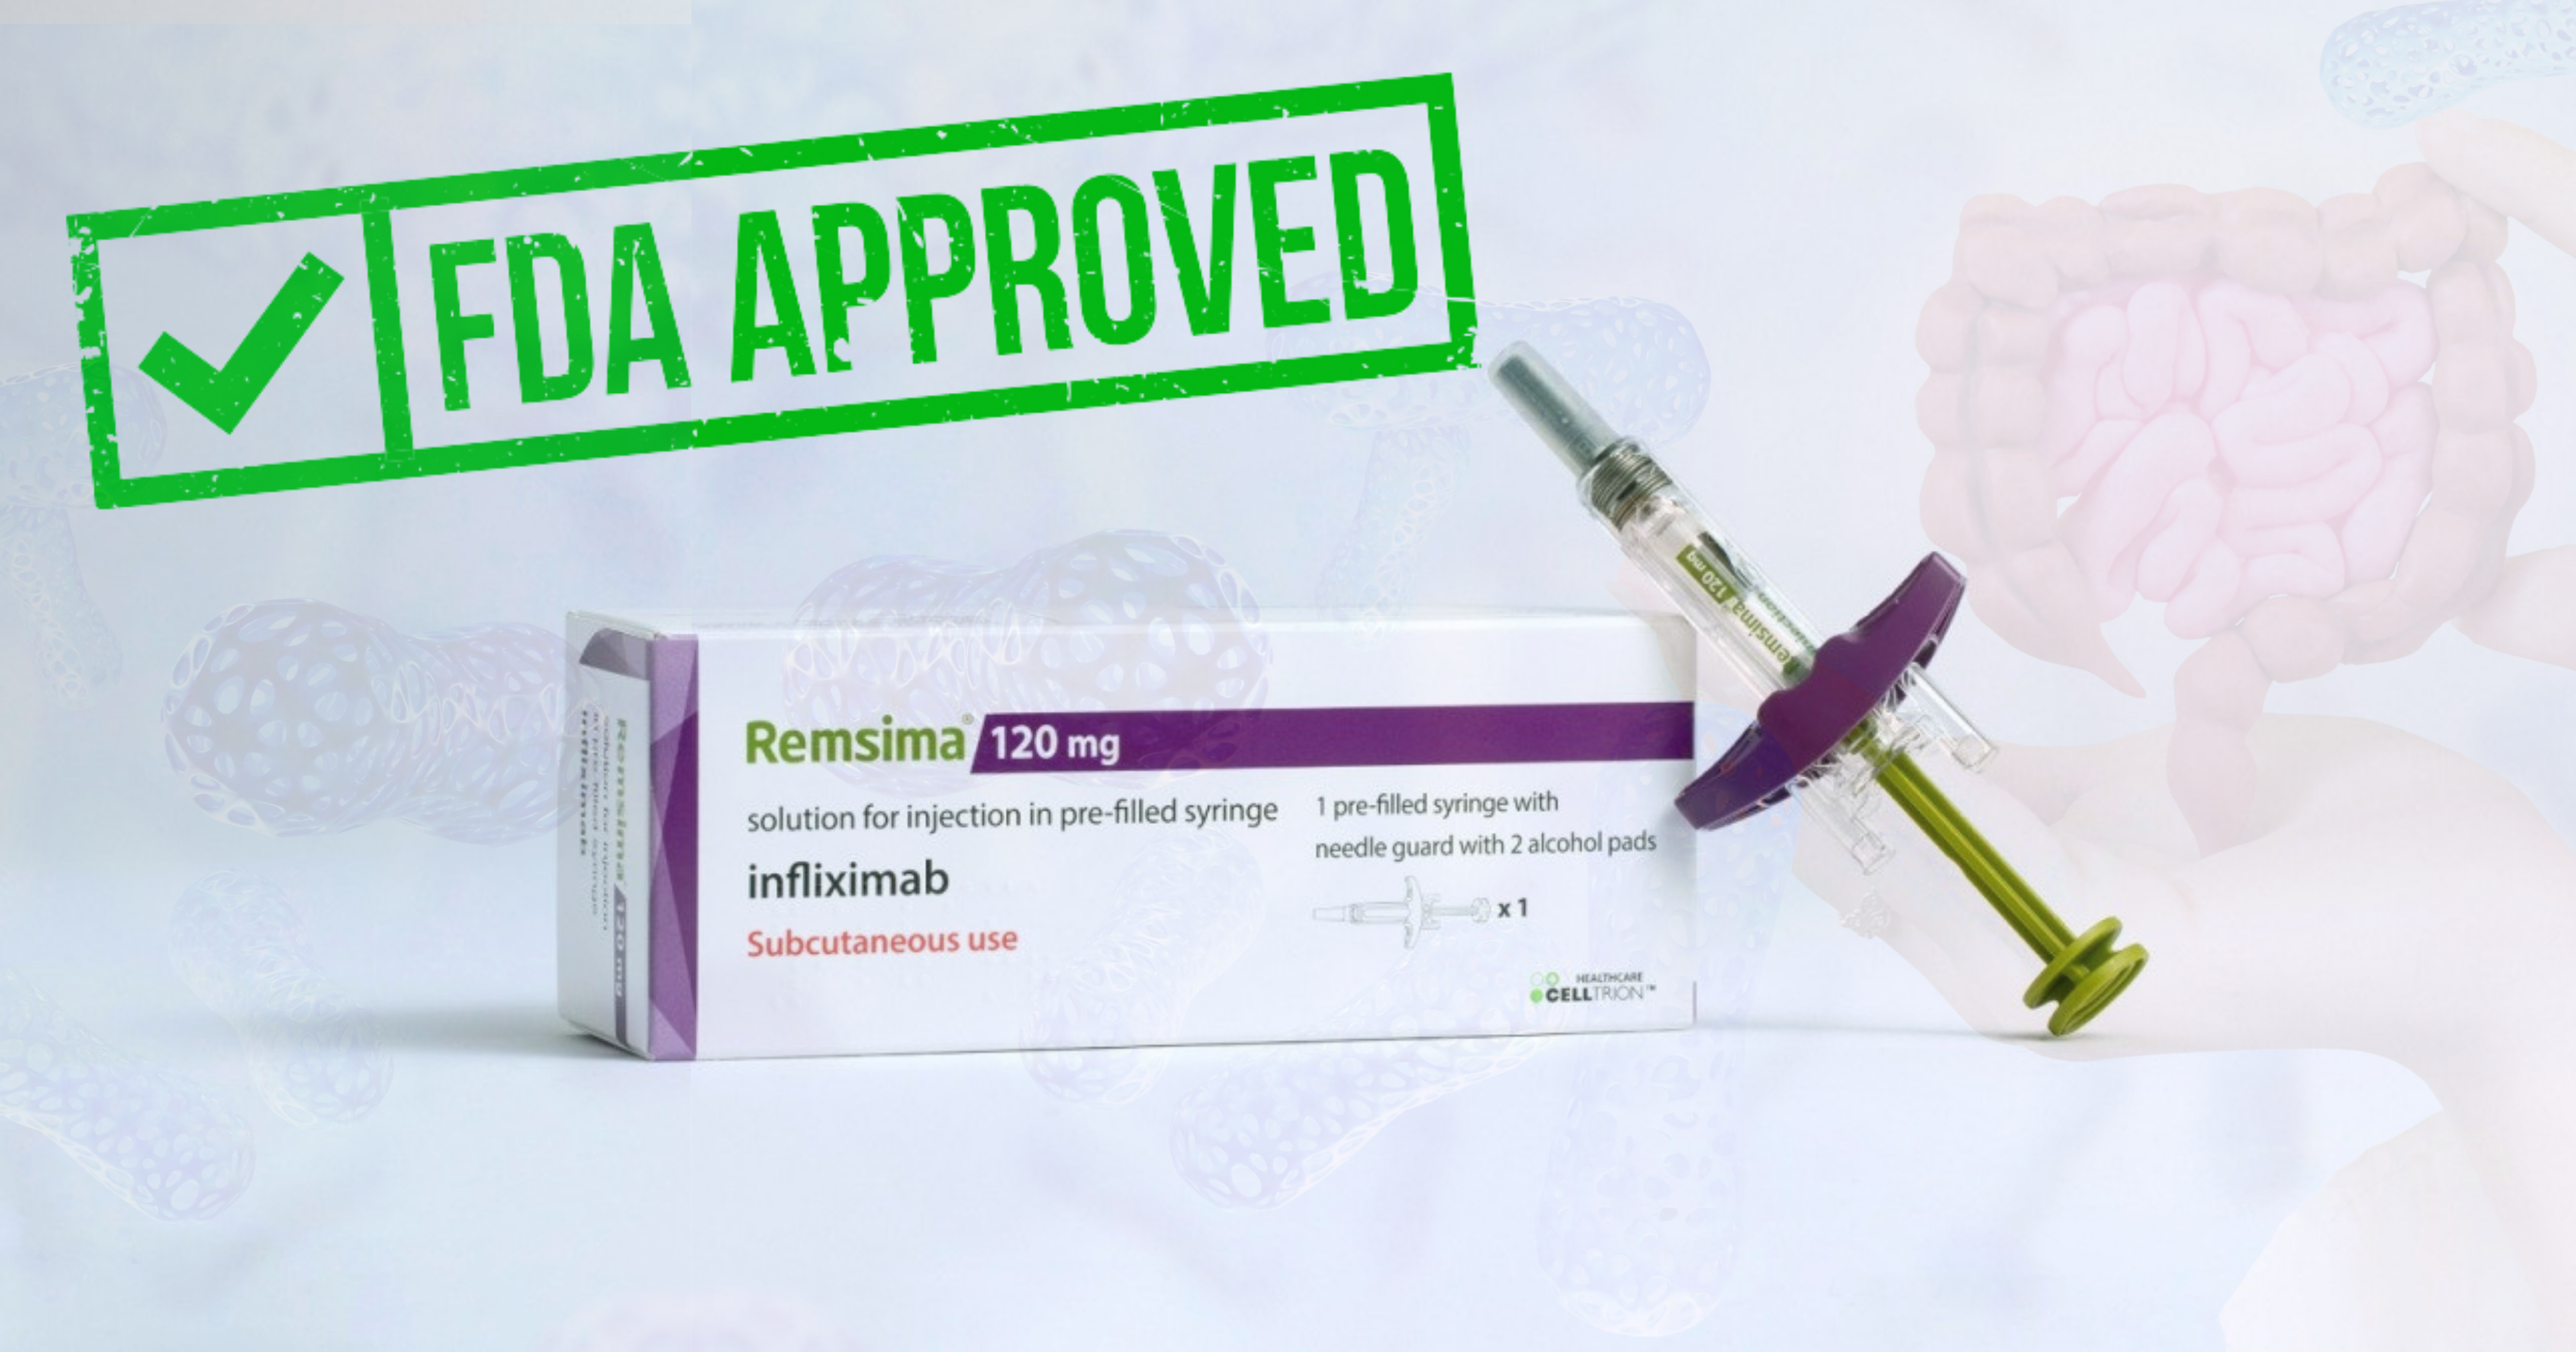 remsima SC with FDA approved over it